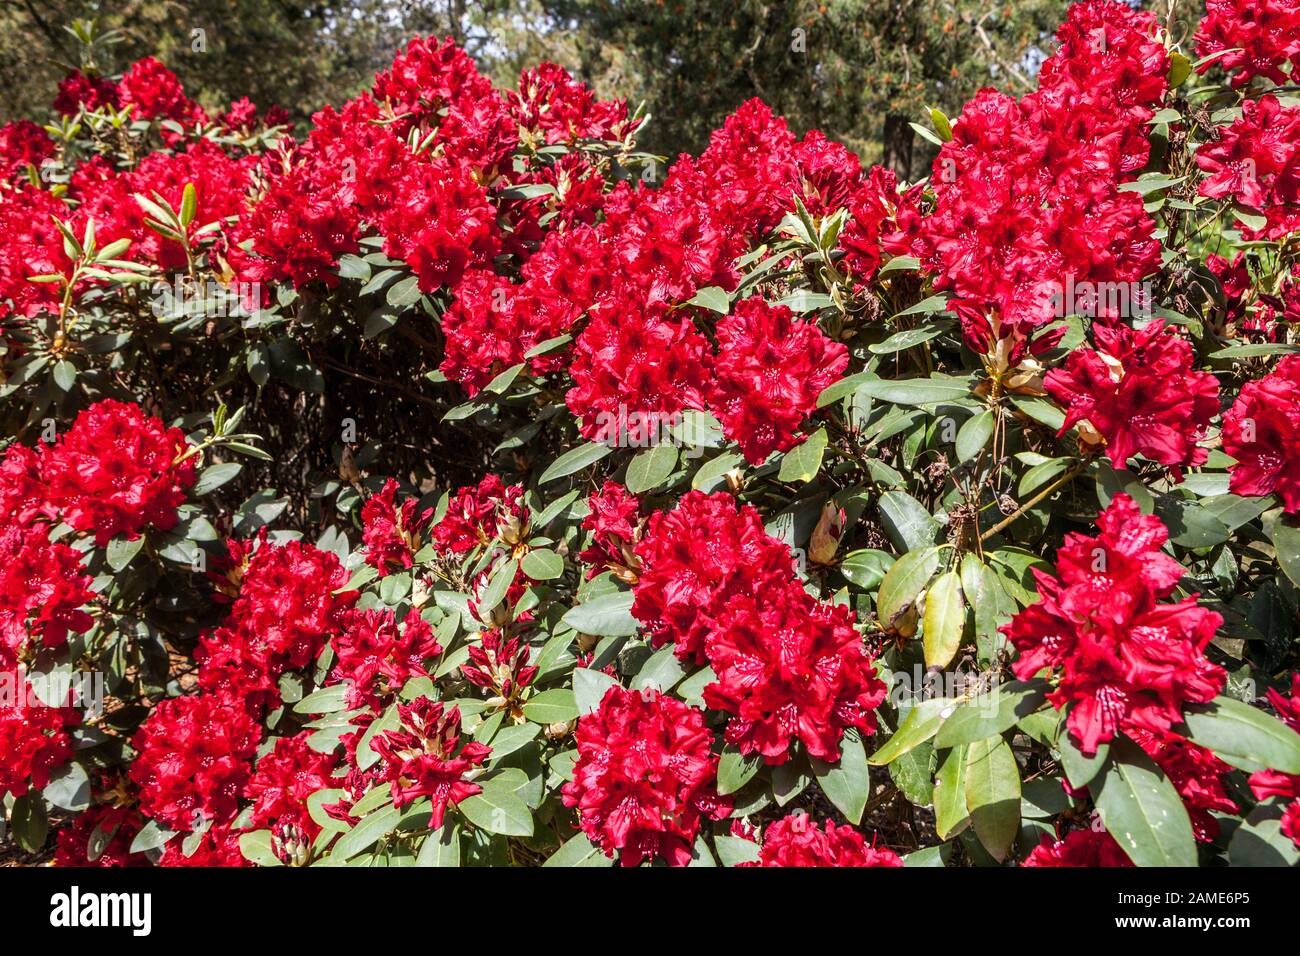 Red rhododendron Flowers Red rhododendrons Garden Rhododendrons Border Forest Shrub Woodlend Forest Edge Red Rhododendron 'Erato' Flowering May Spring Stock Photo